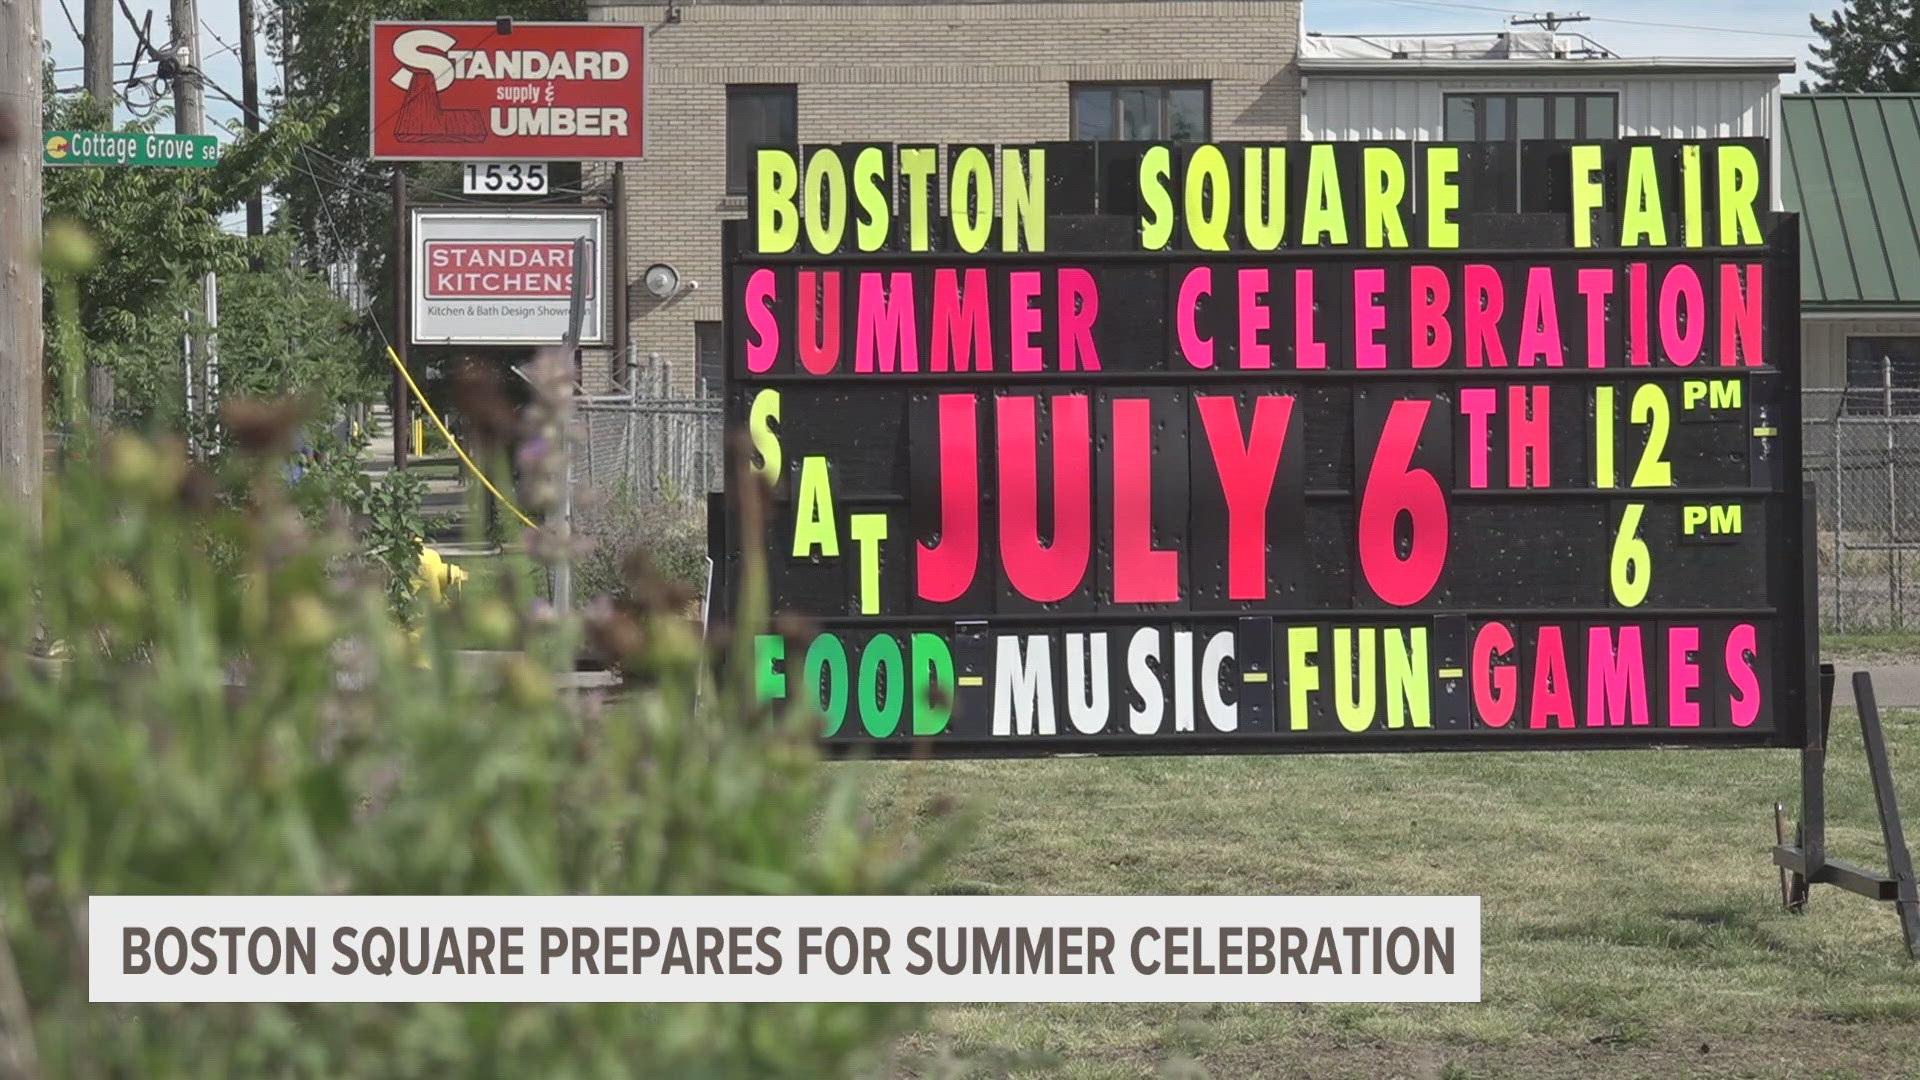 The Boston Square Neighborhood Association leaders said this is a great opportunity to celebrate the developments that have been made in the community lately.